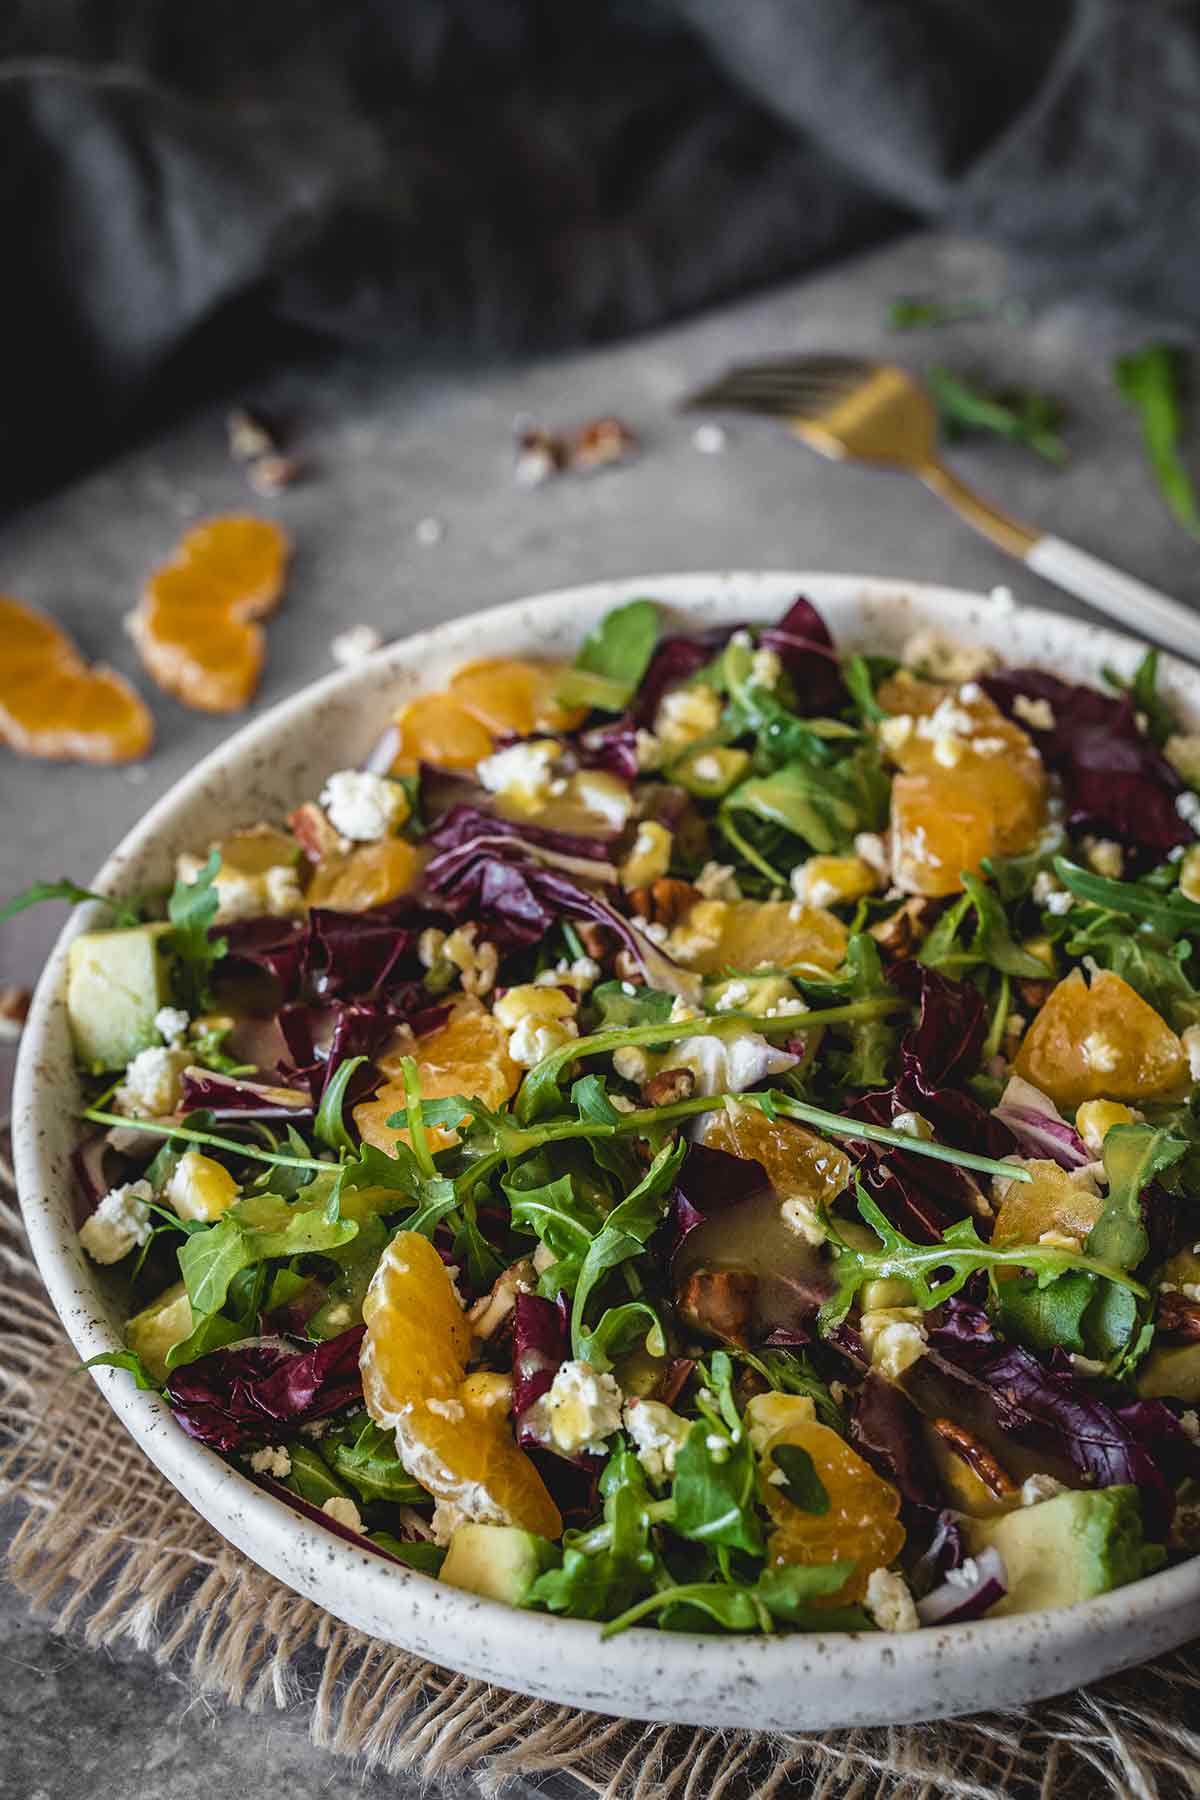 Clementine salad with feta in a bowl